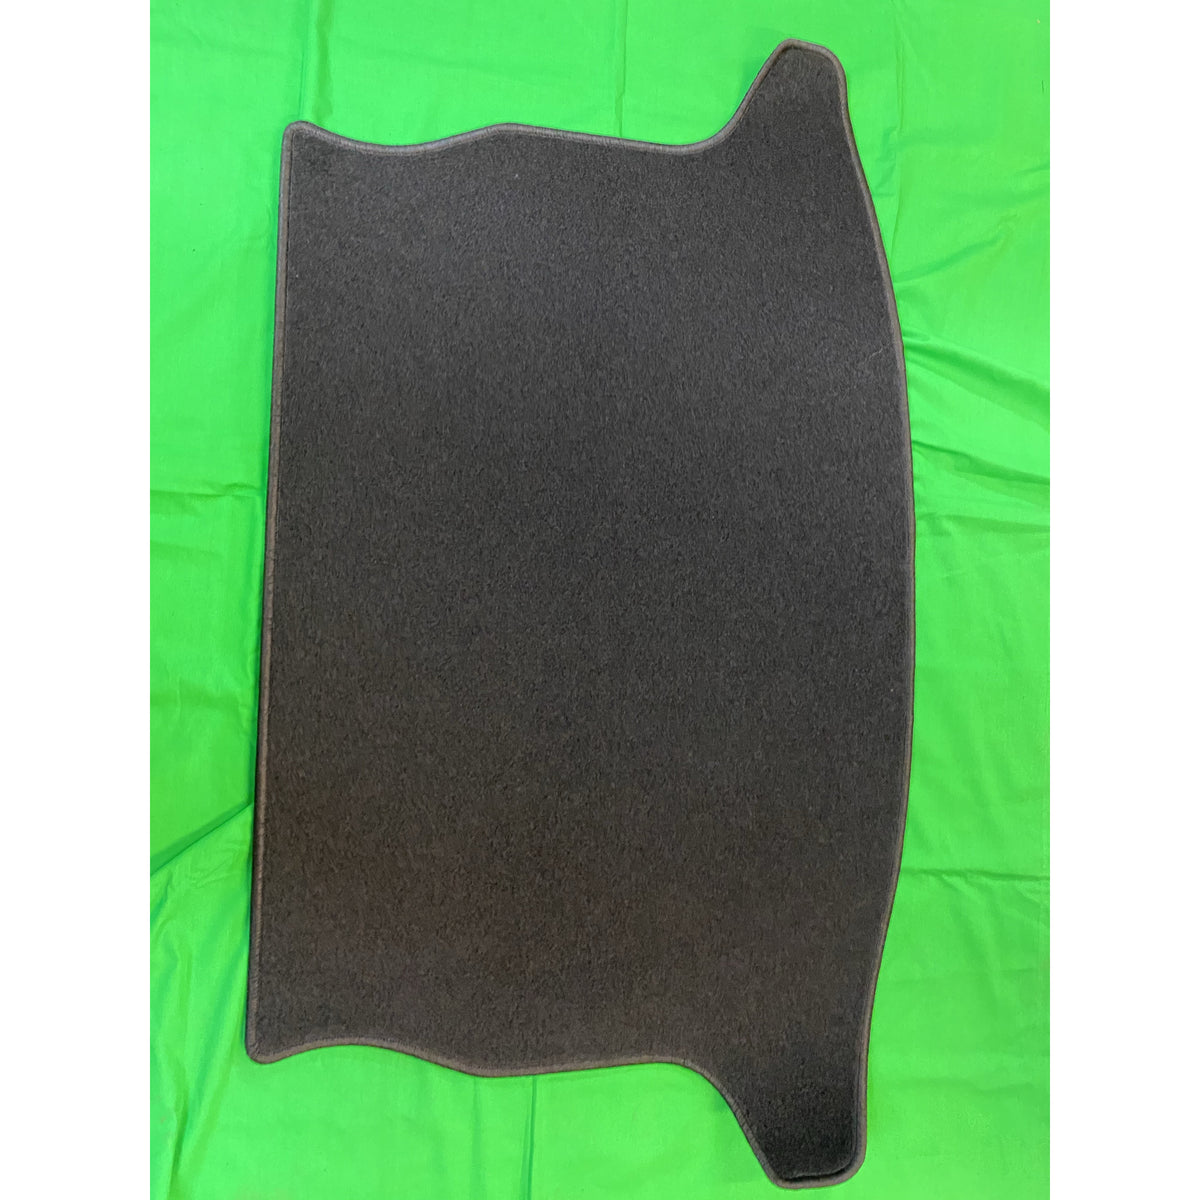 MG GS Genuine BOOT MAT (CARPET) - Black With Logo | ARG Parts & Accessories.